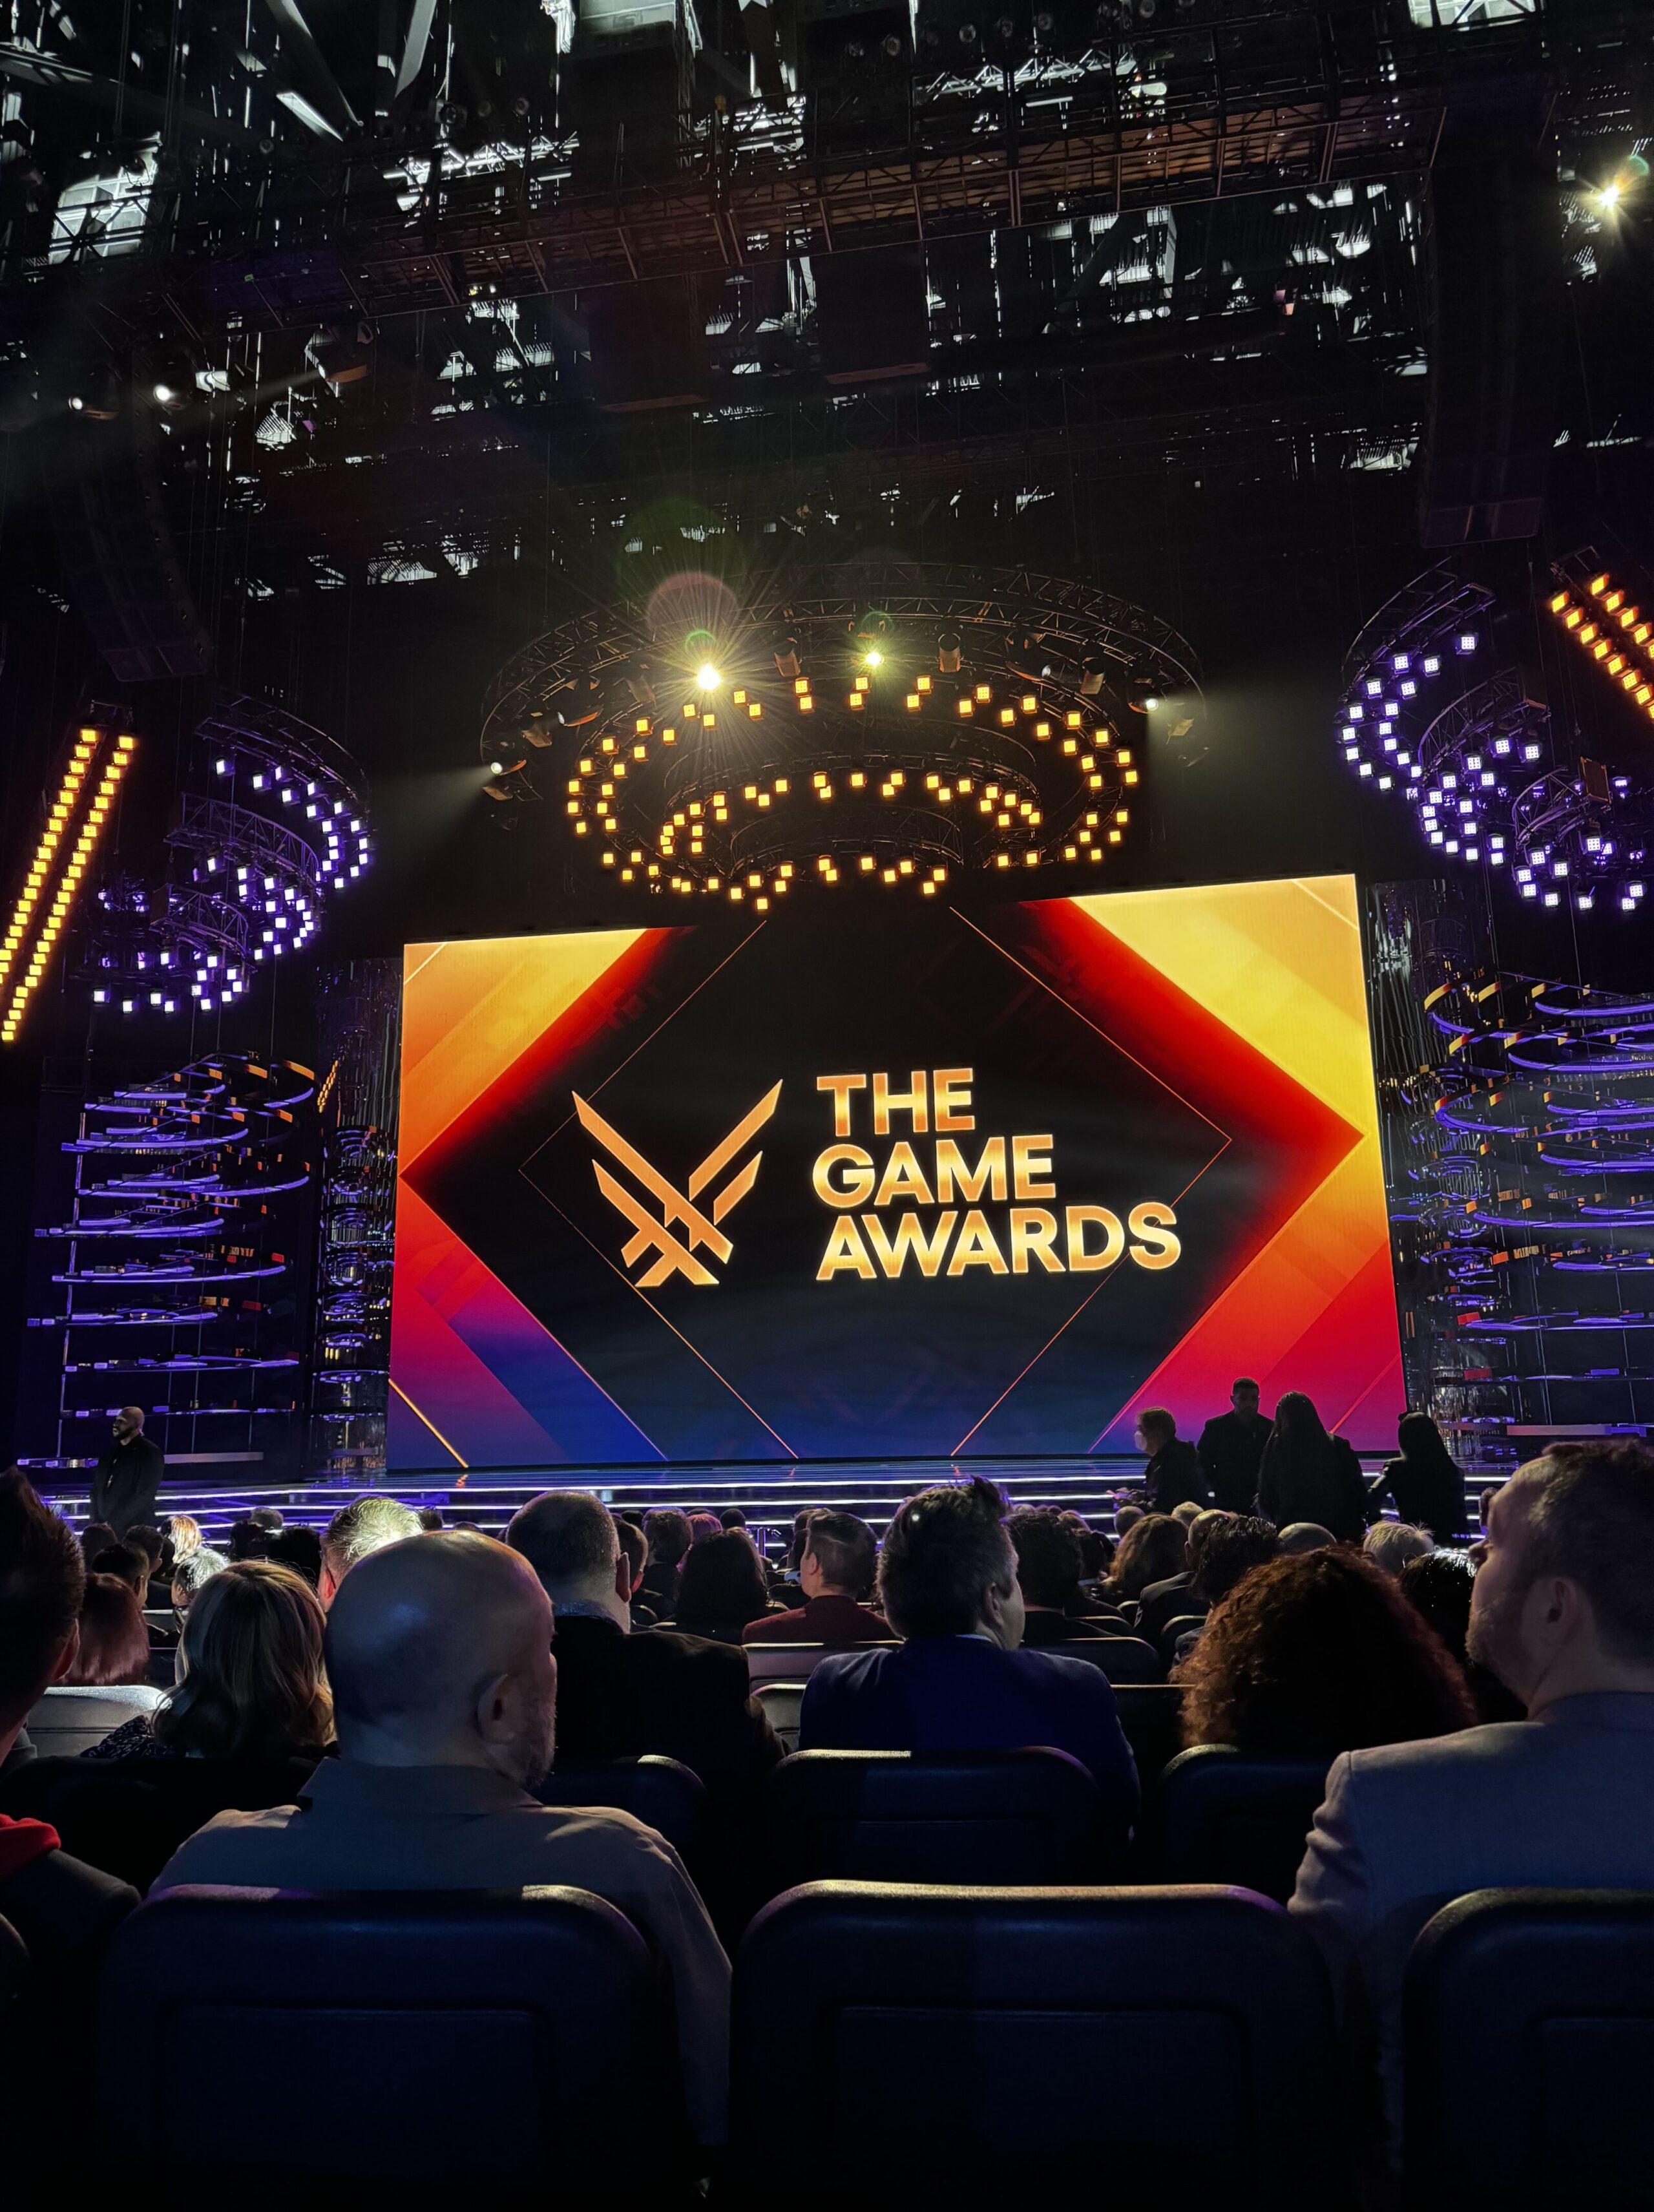 The Game Awards 2017 Is The Biggest In Terms of Scope And Scale